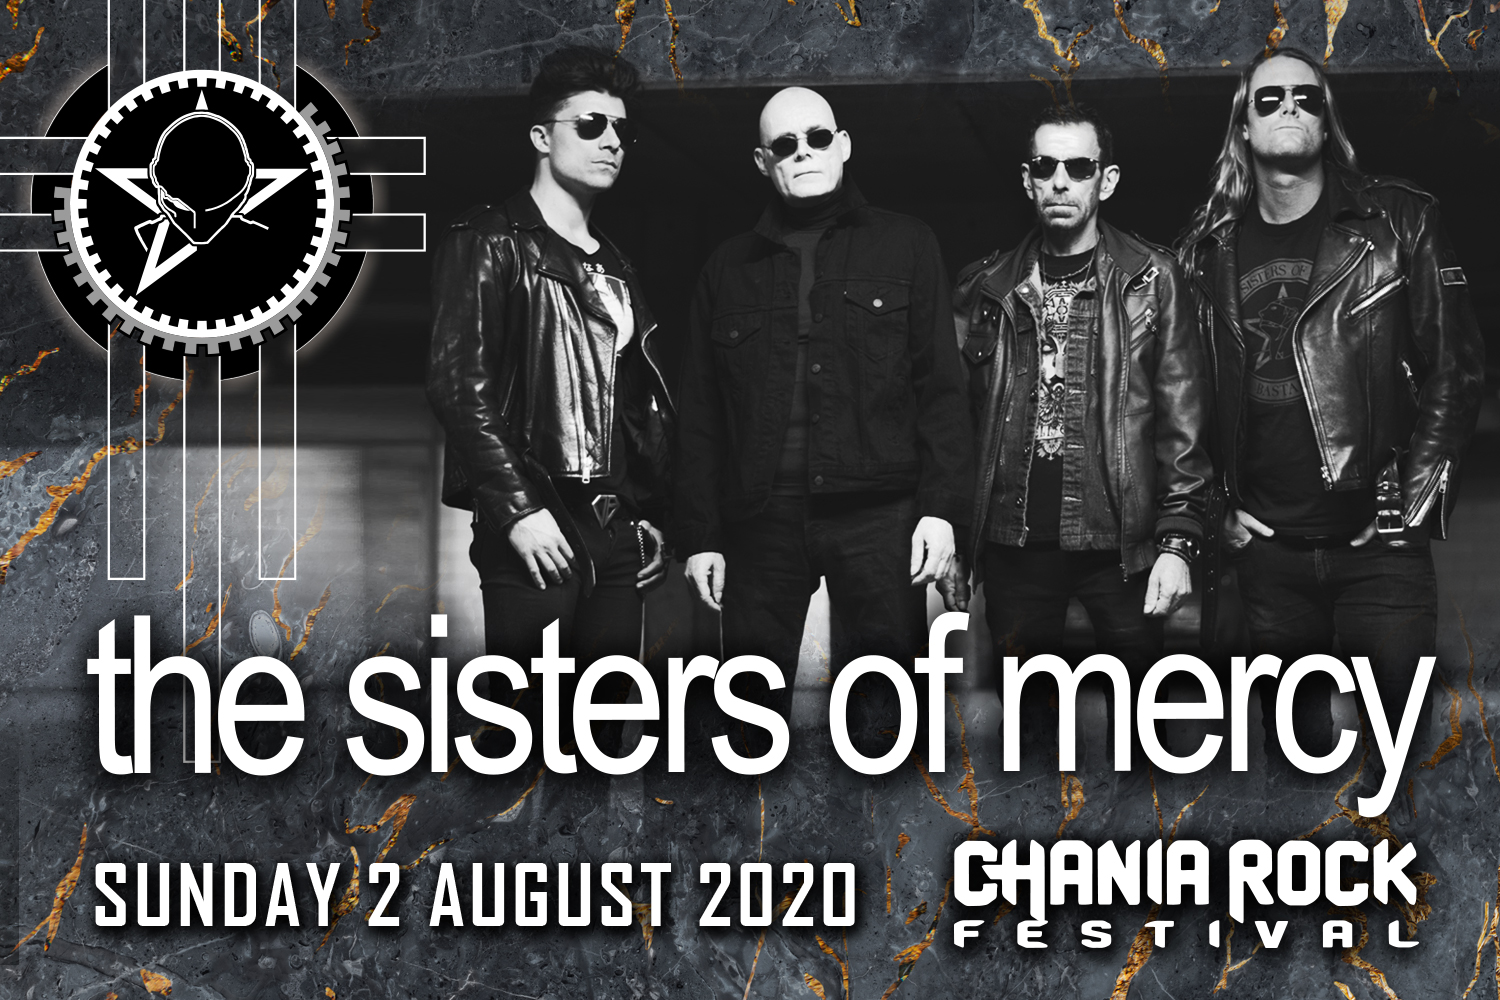 Chania Rock Festival 2020: Έρχονται οι Sisters of Mercy